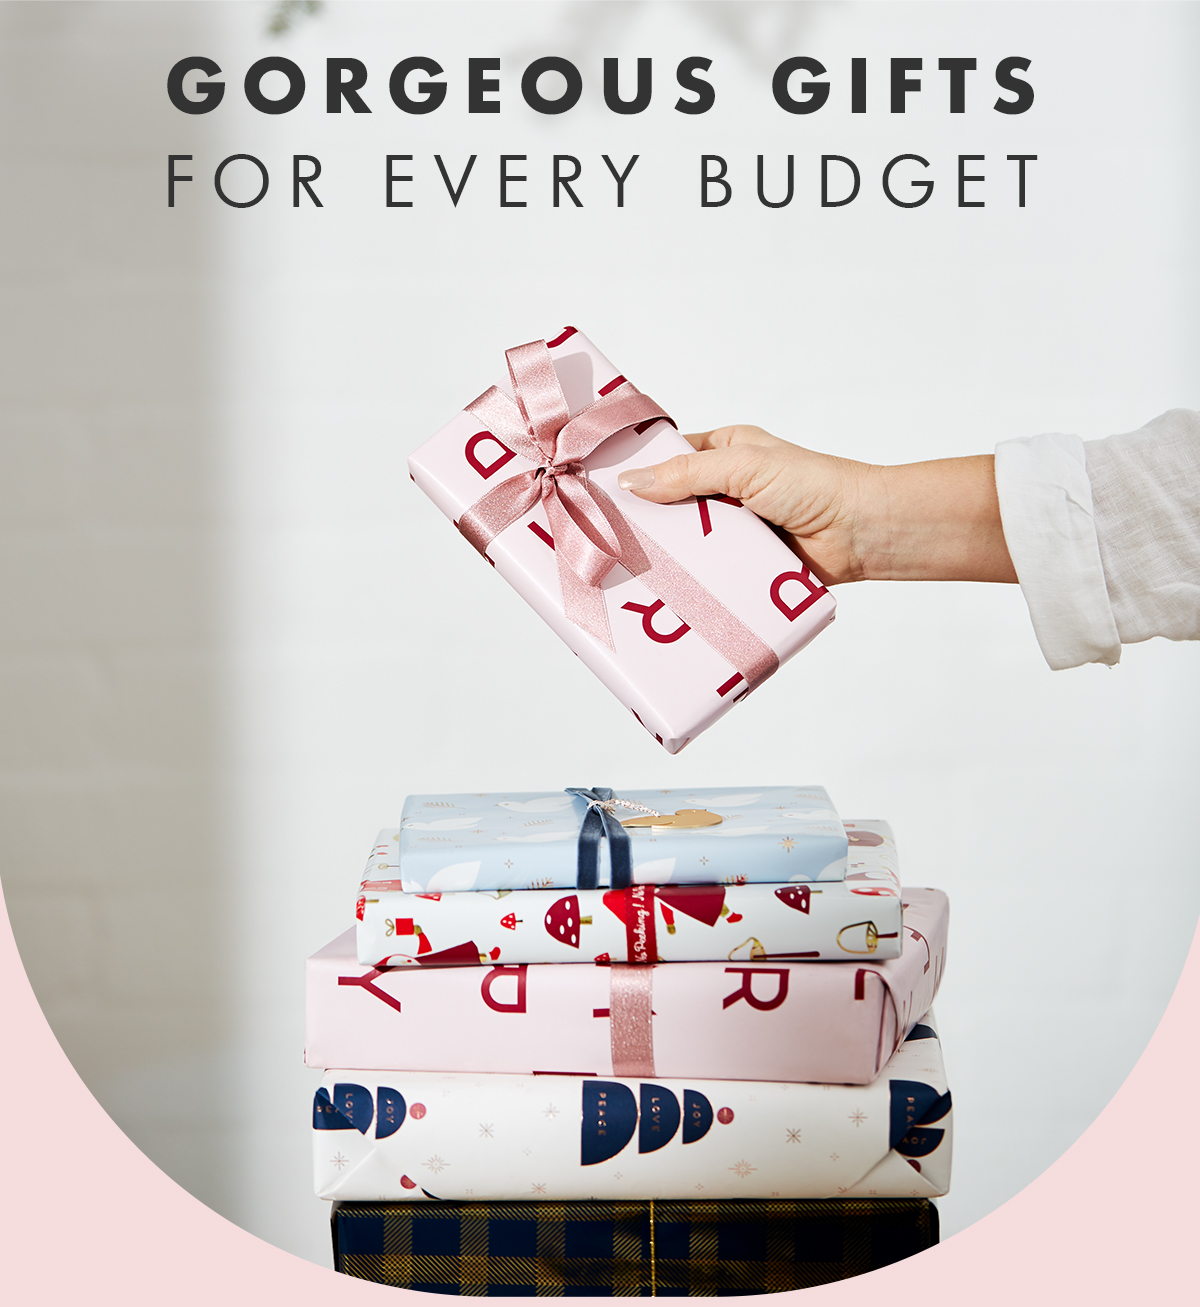 Gifts for every budget. 